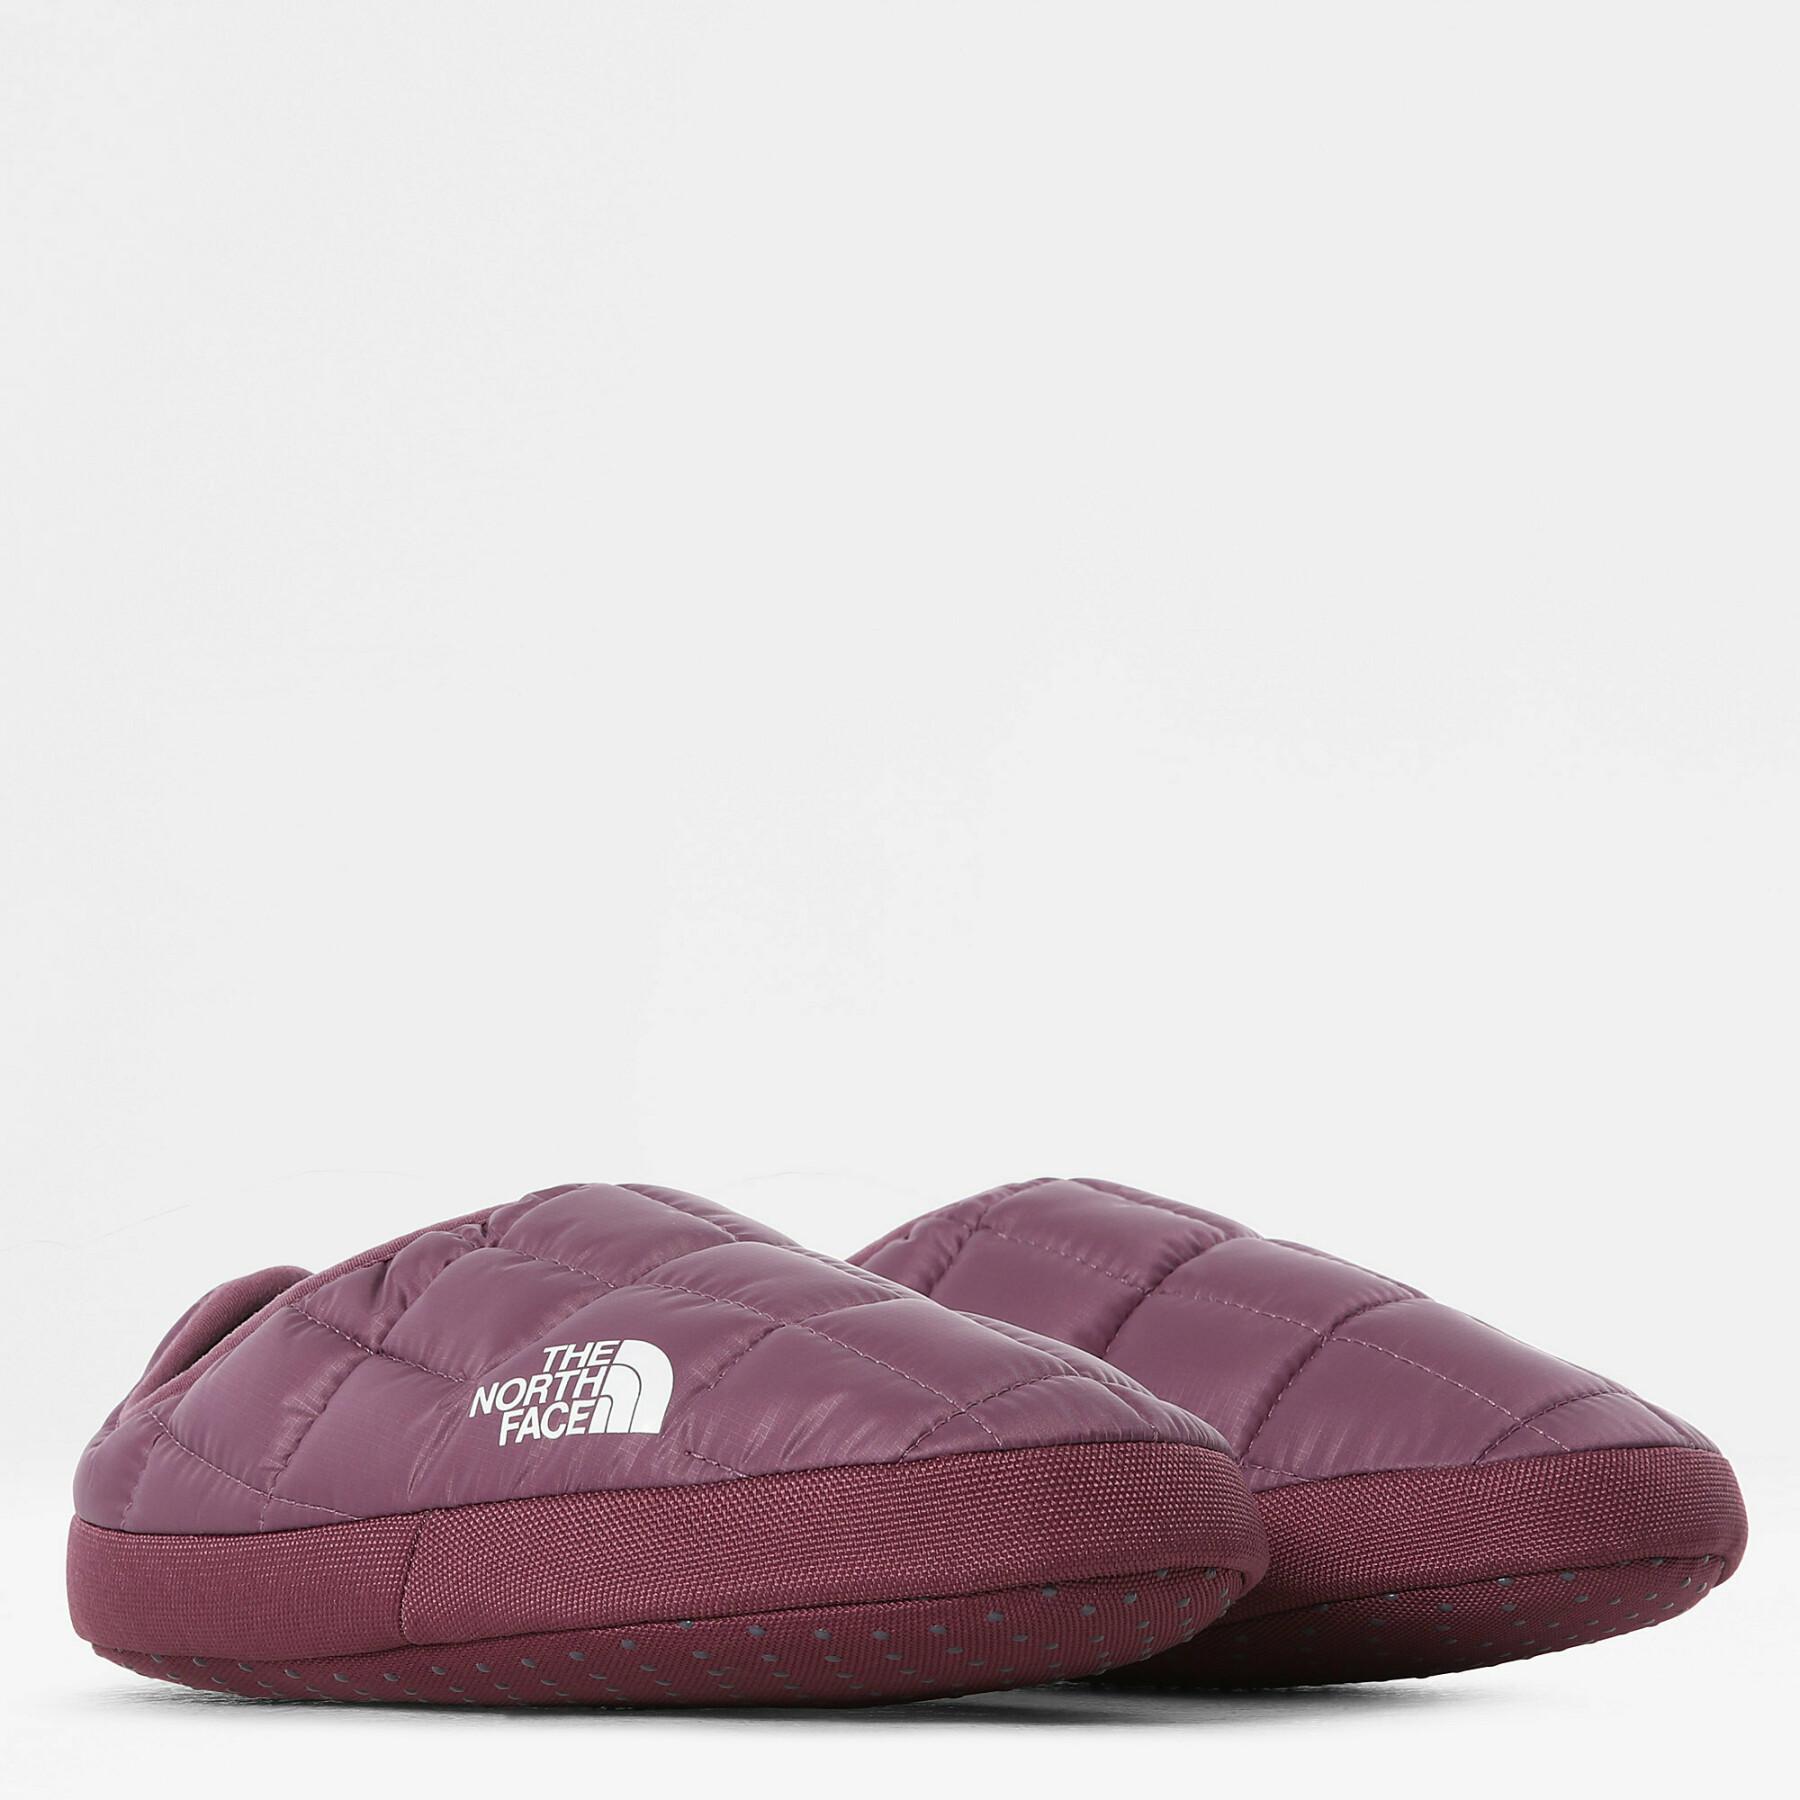 Chaussons femme The North Face Thermoball Tent V